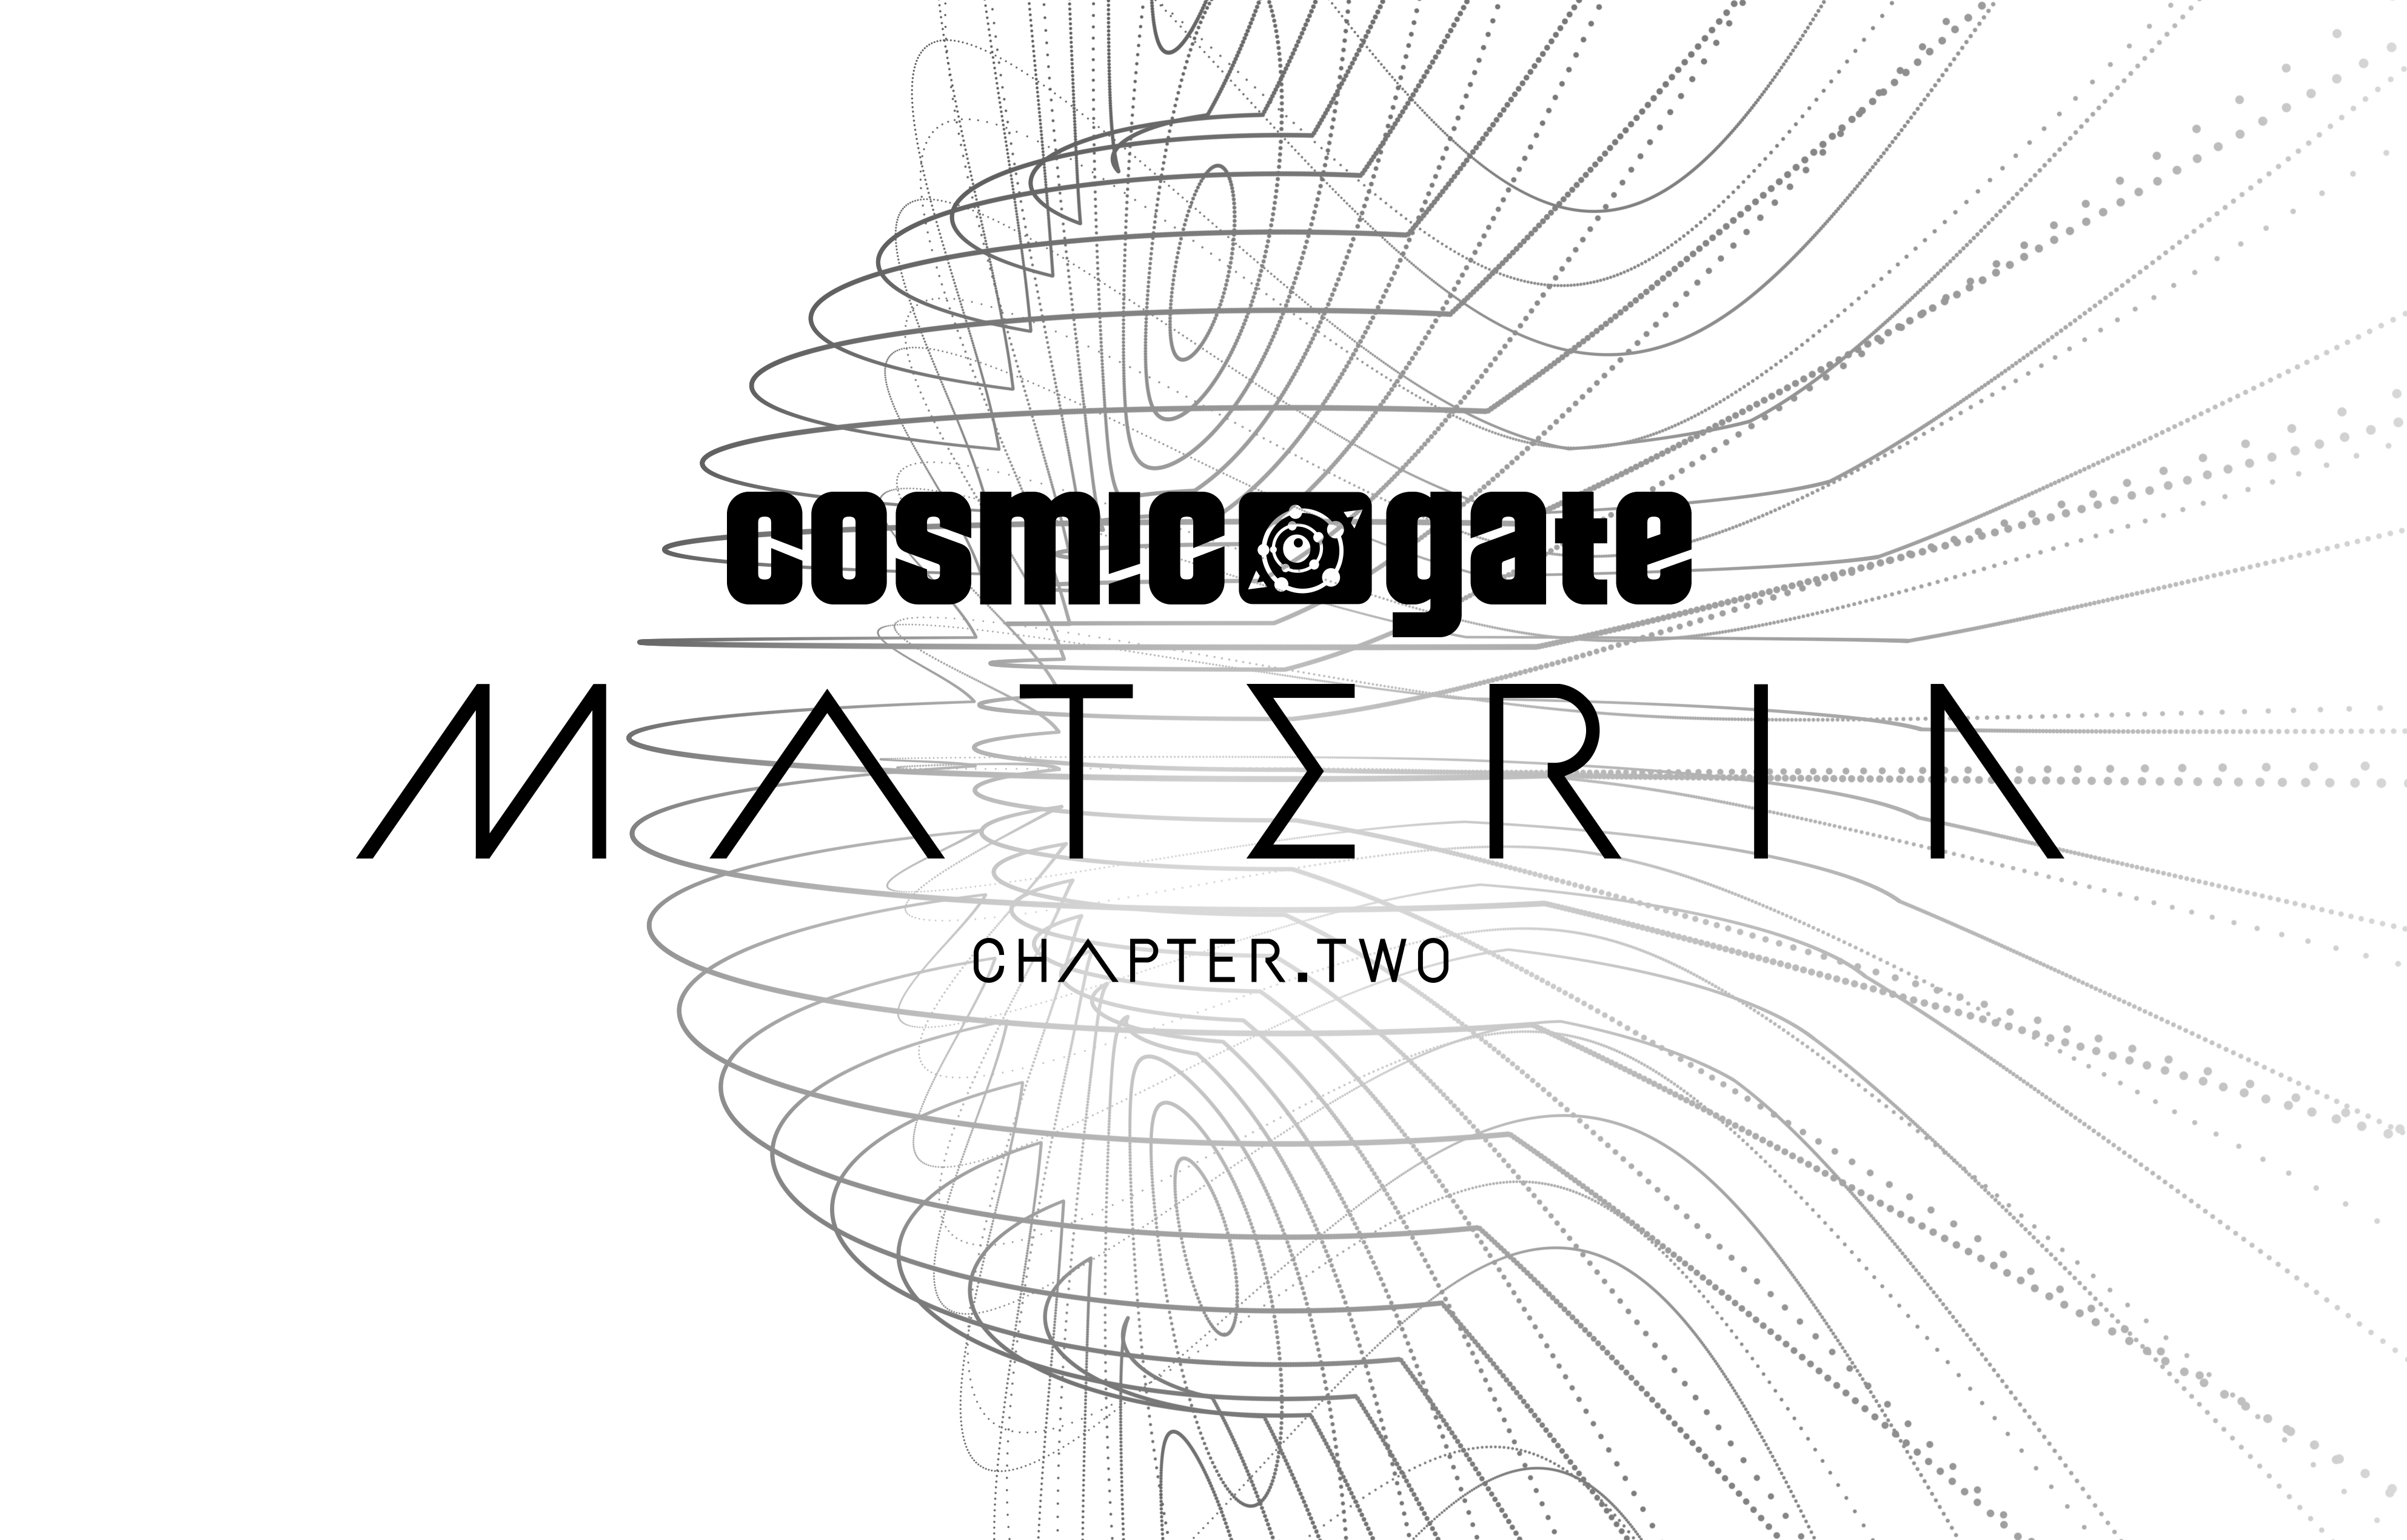 Cosmic Gate Materia Chapter.Two